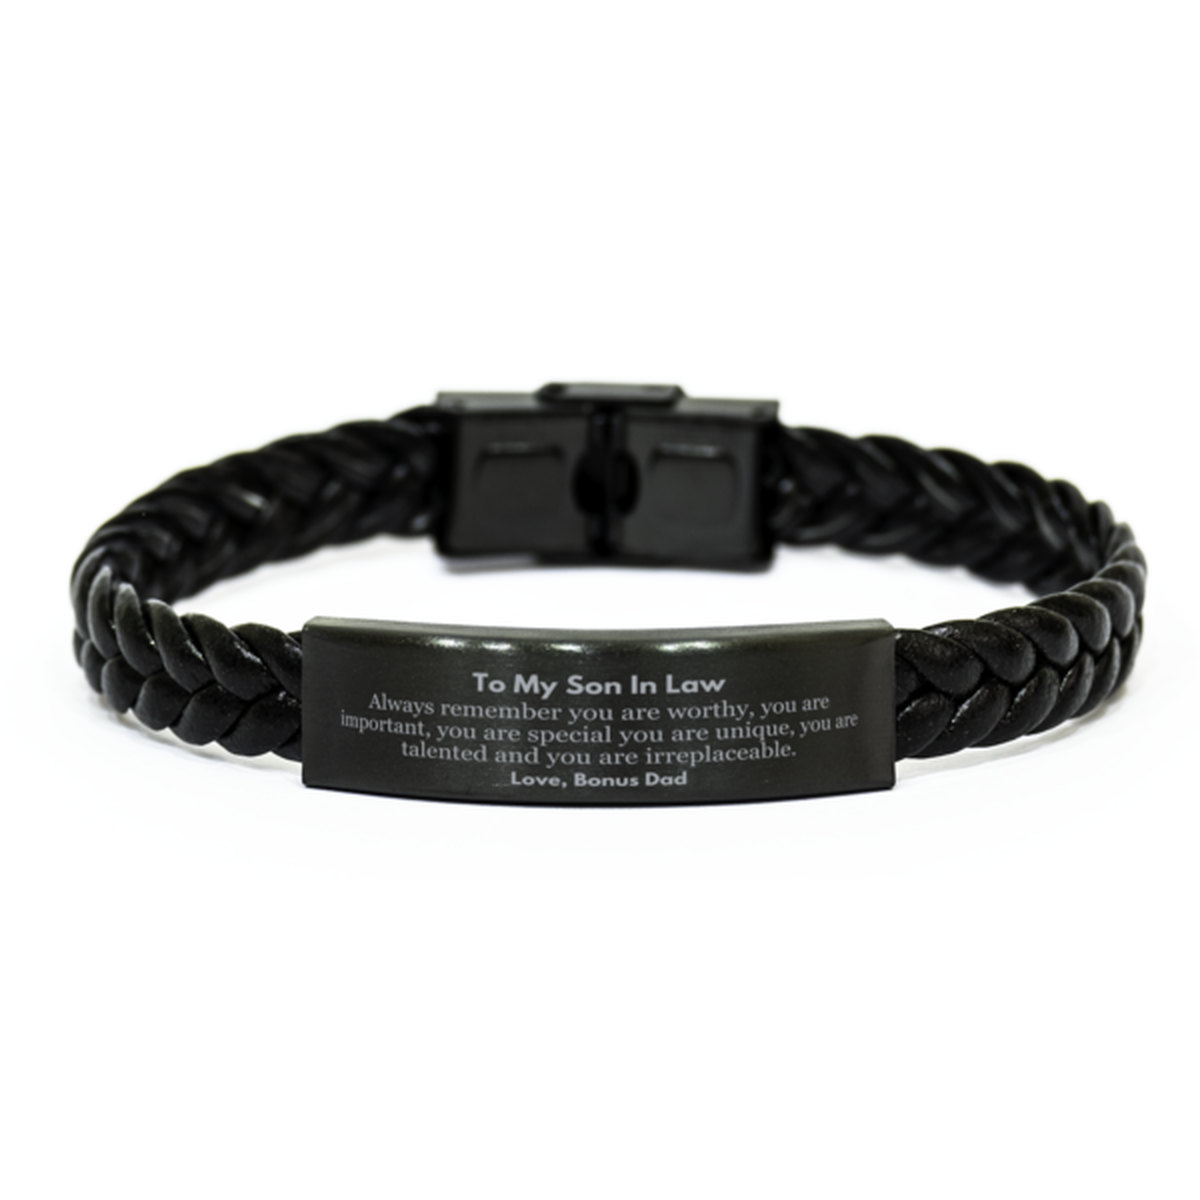 Son In Law Birthday Gifts from Bonus Dad, Inspirational Braided Leather Bracelet for Son In Law Christmas Graduation Gifts for Son In Law Always remember you are worthy, you are important. Love, Bonus Dad